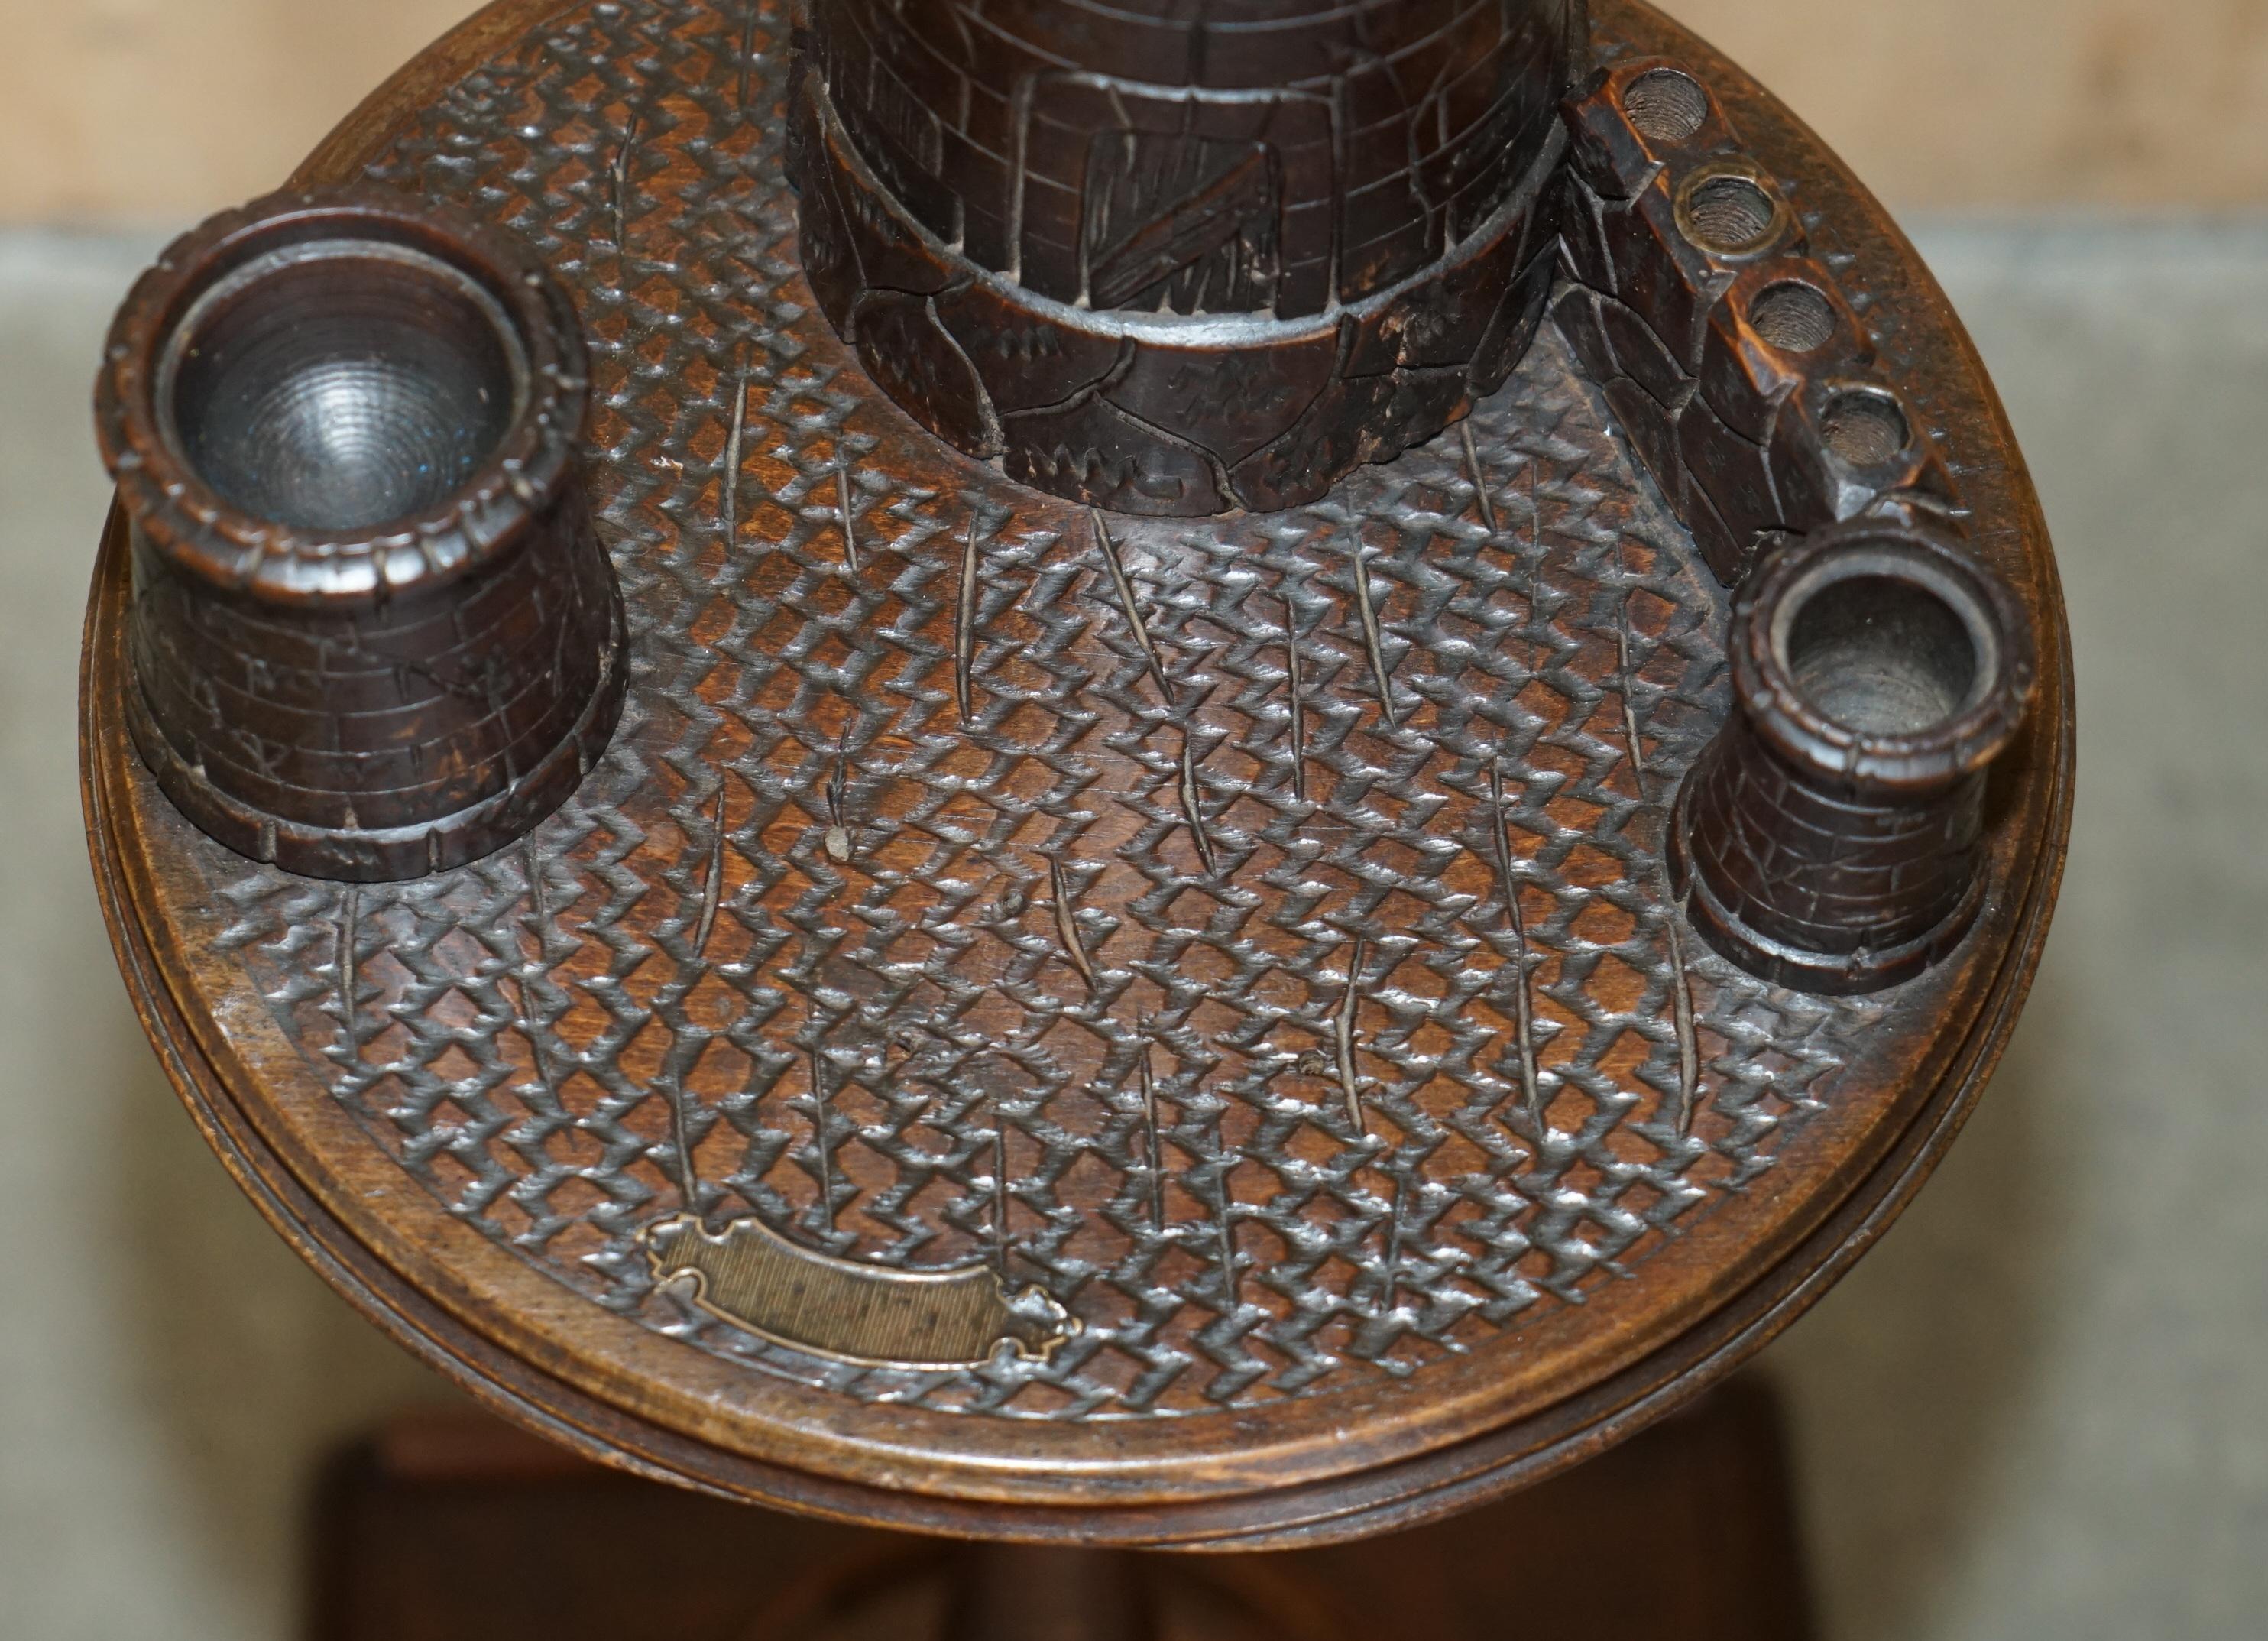 ANTIQUE ViCTORIAN SMOKERS SIDE TABLE DEPICTING CASTLES FOR PIPES TOBACCO CIGARS For Sale 1